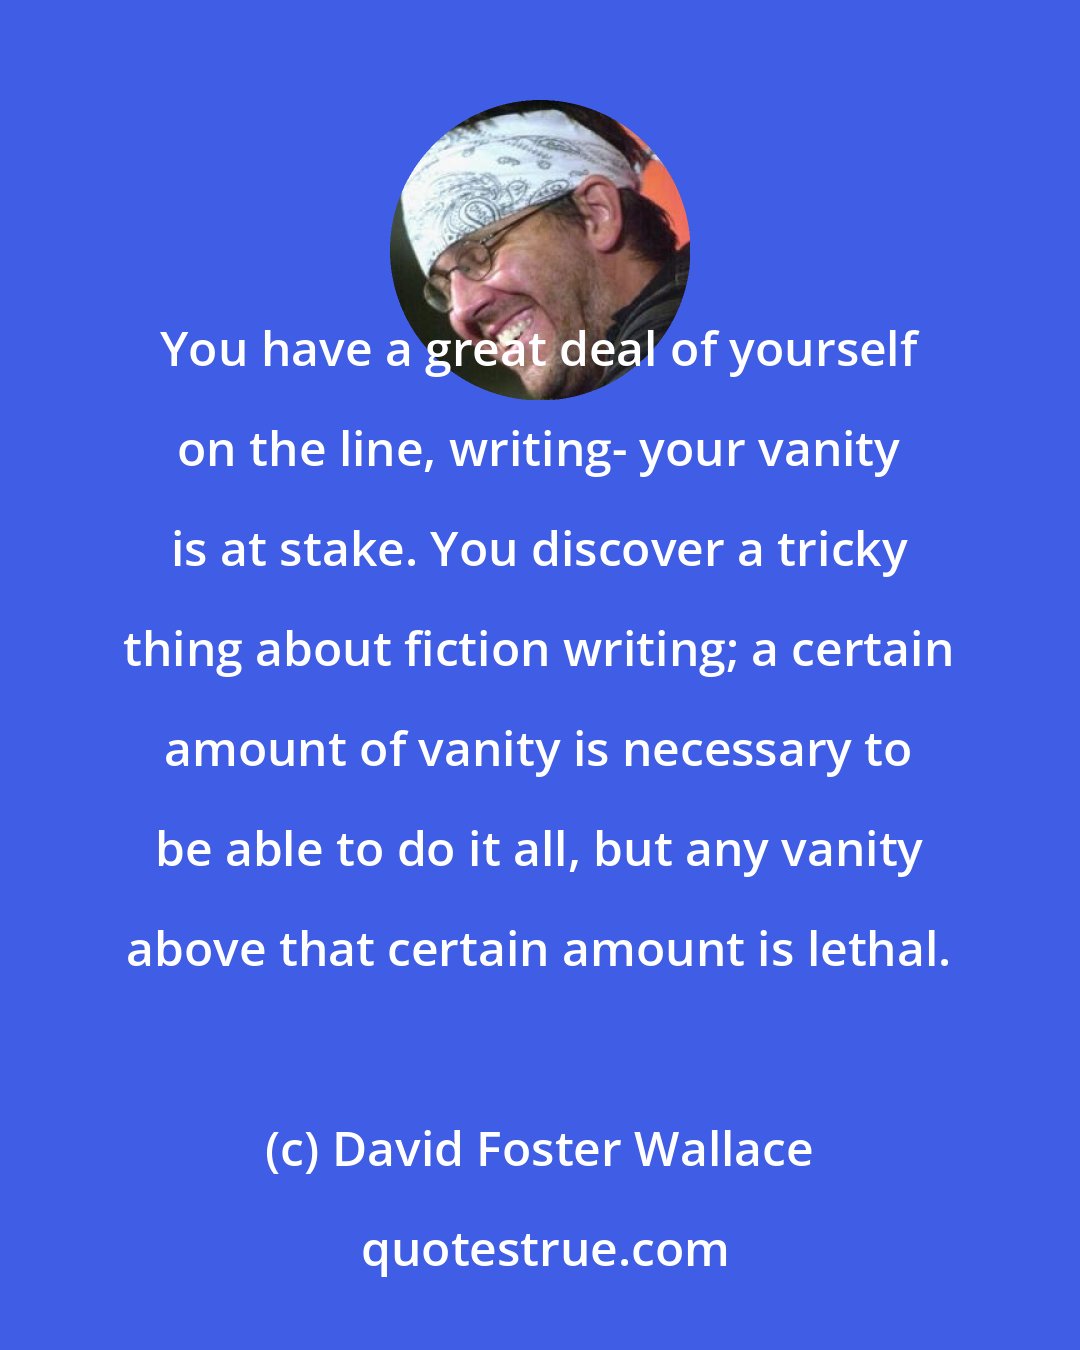 David Foster Wallace: You have a great deal of yourself on the line, writing- your vanity is at stake. You discover a tricky thing about fiction writing; a certain amount of vanity is necessary to be able to do it all, but any vanity above that certain amount is lethal.